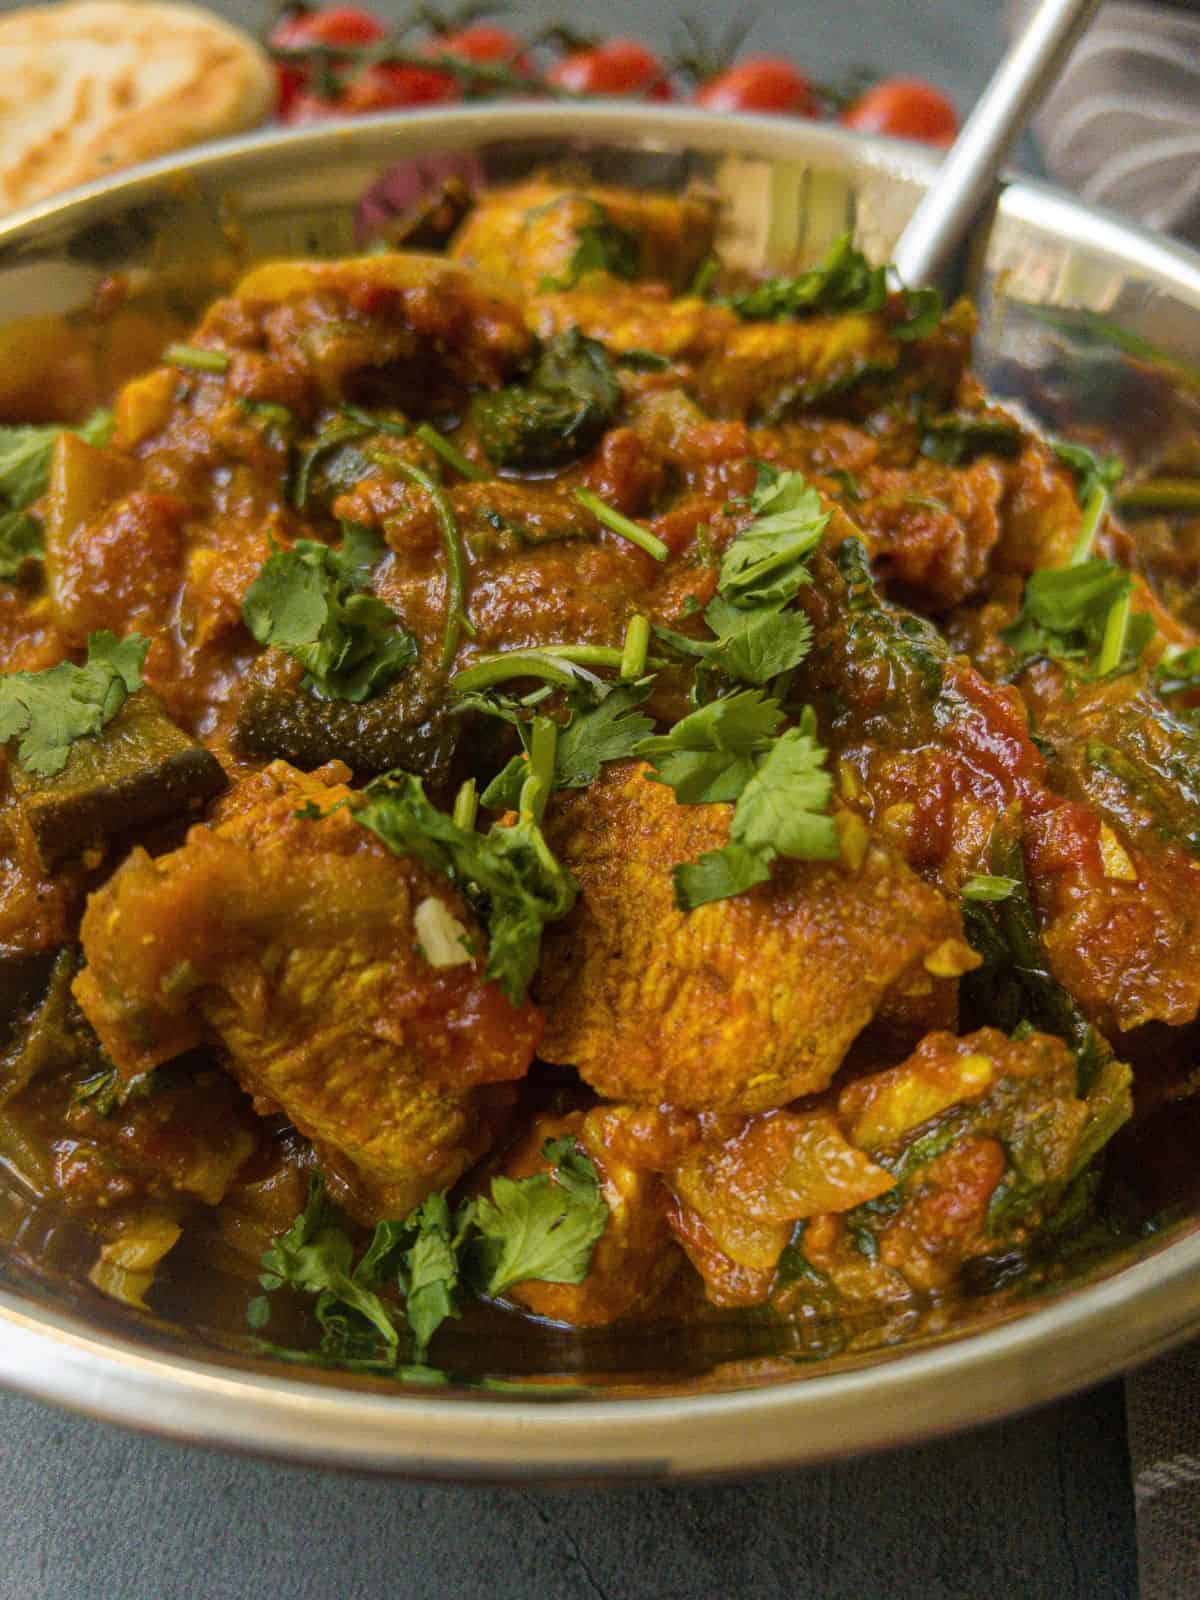 Chicken and aubergine curry in a silver balti dish garnished with coriander.